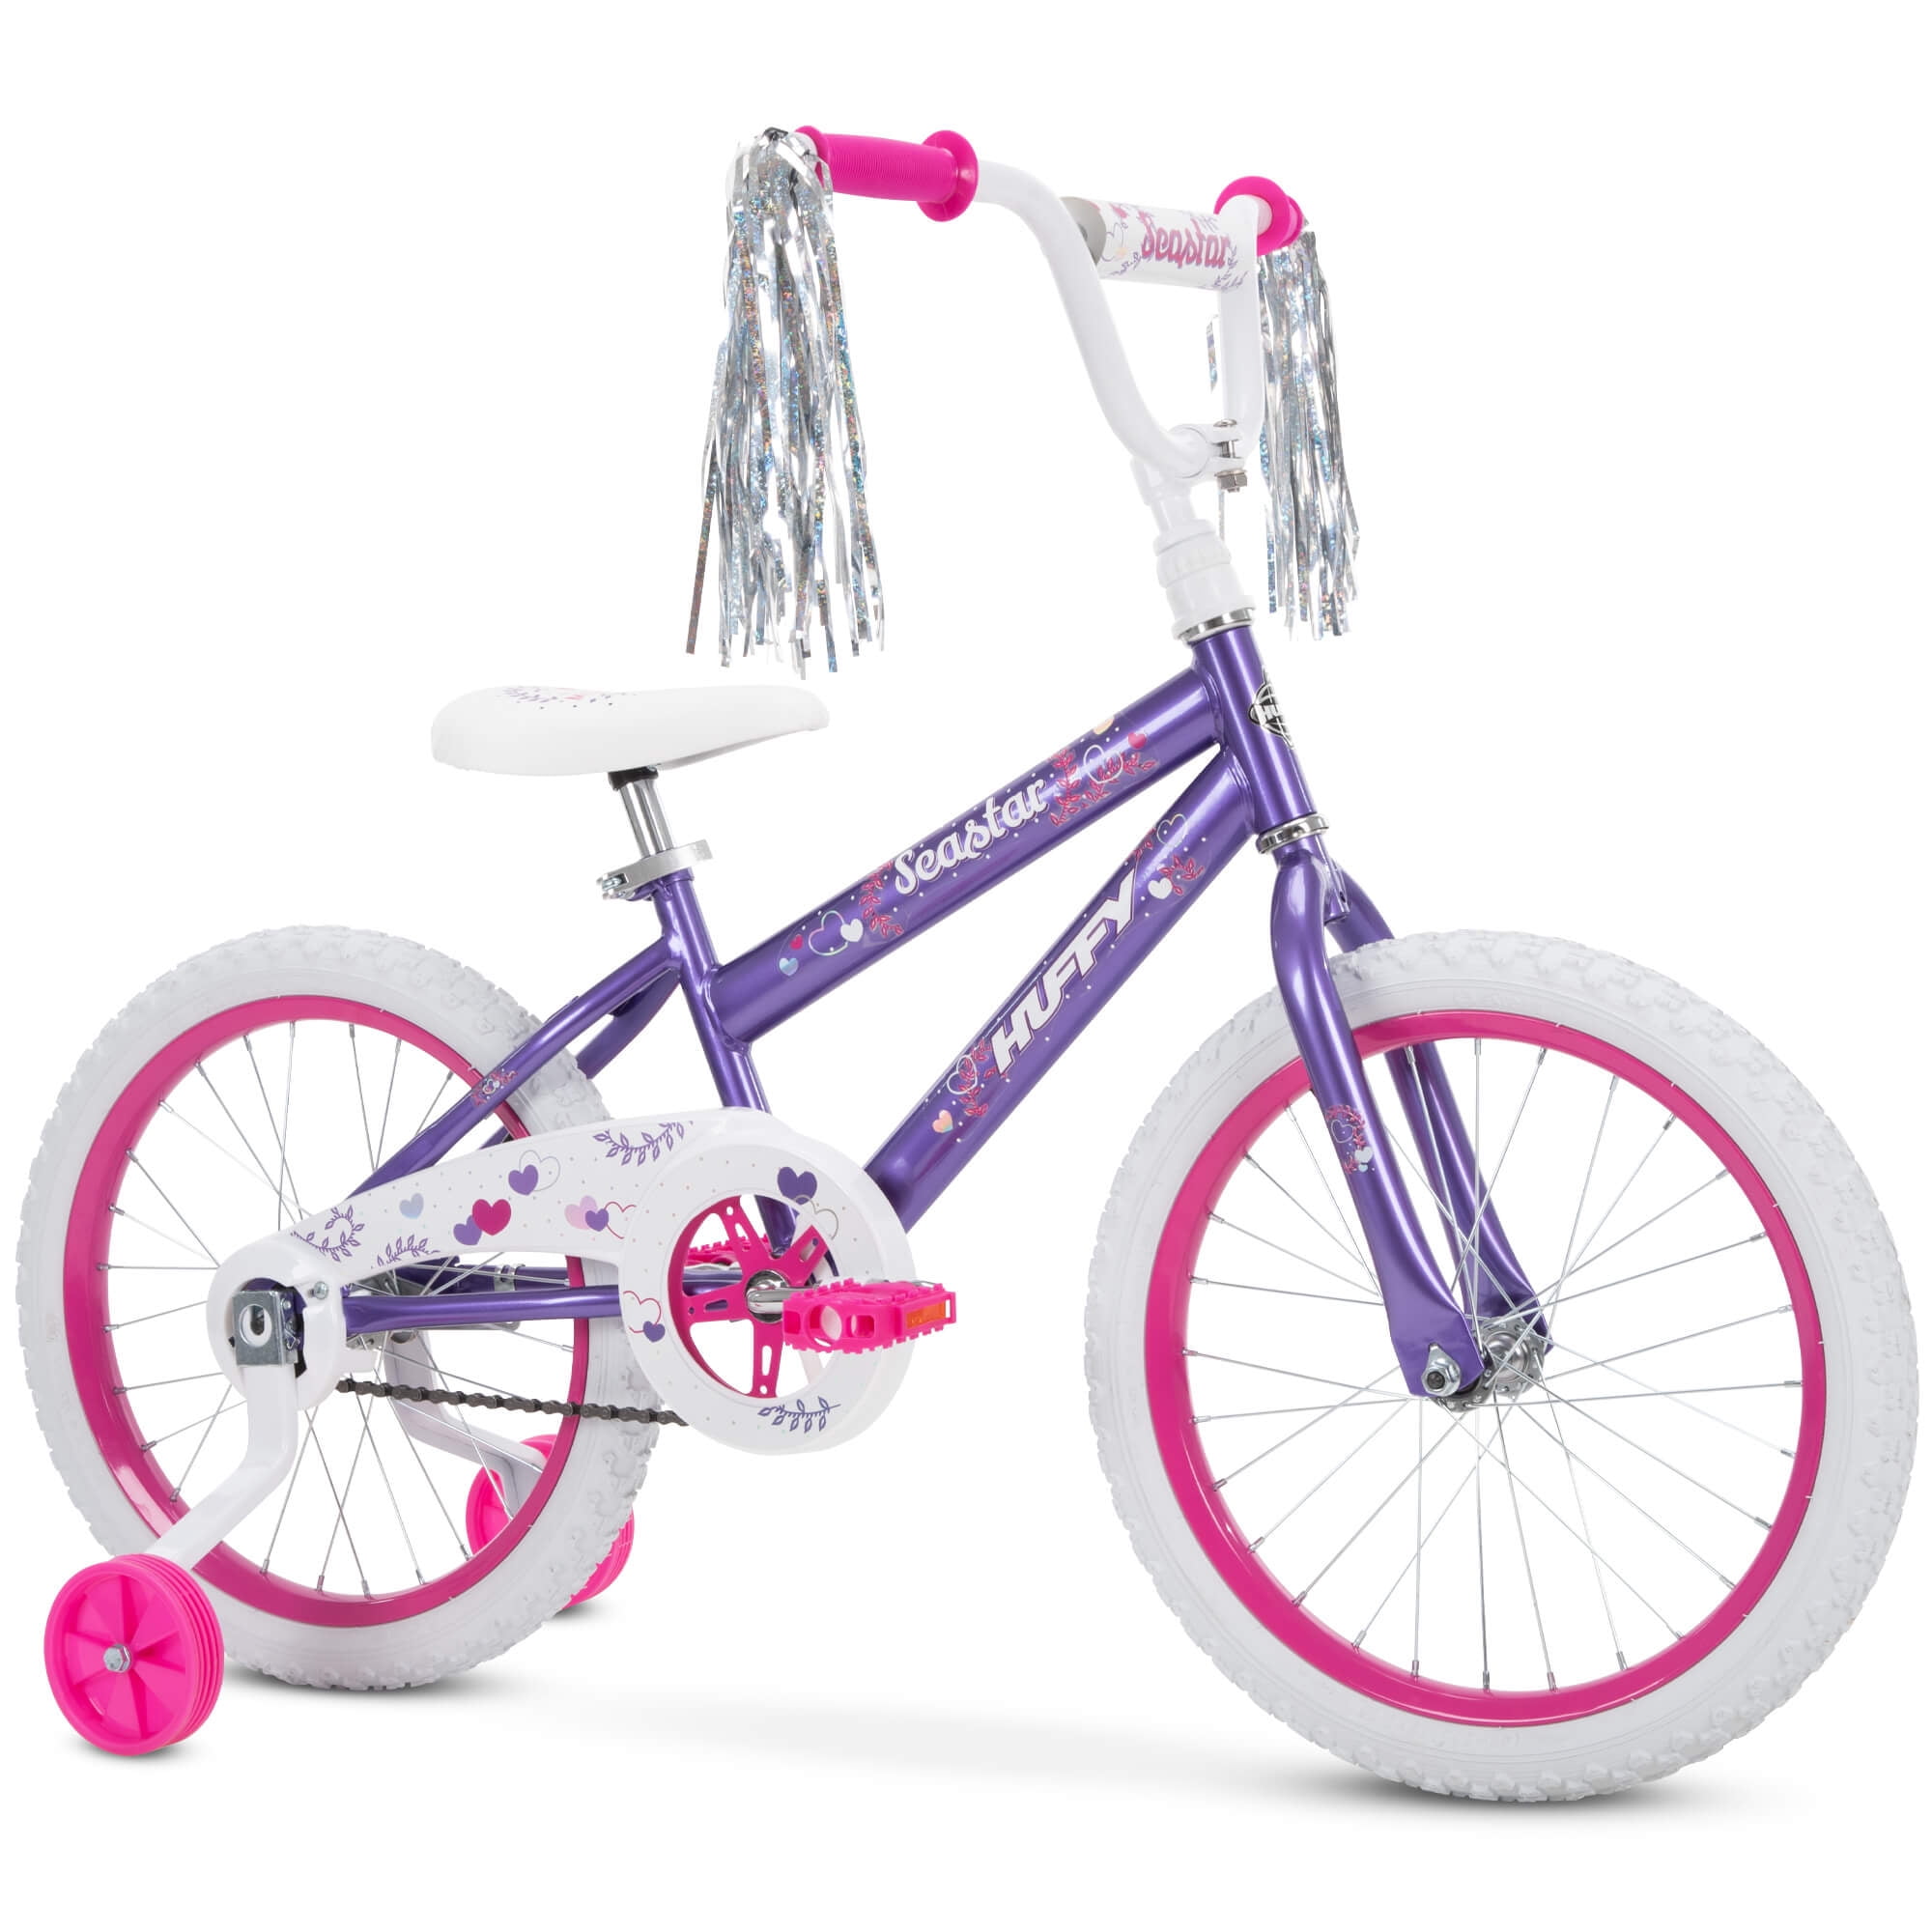 Girl's 18" Sparkles BMX Bike w/ Front Pegs Bag and Training Wheels Ages 6-9 